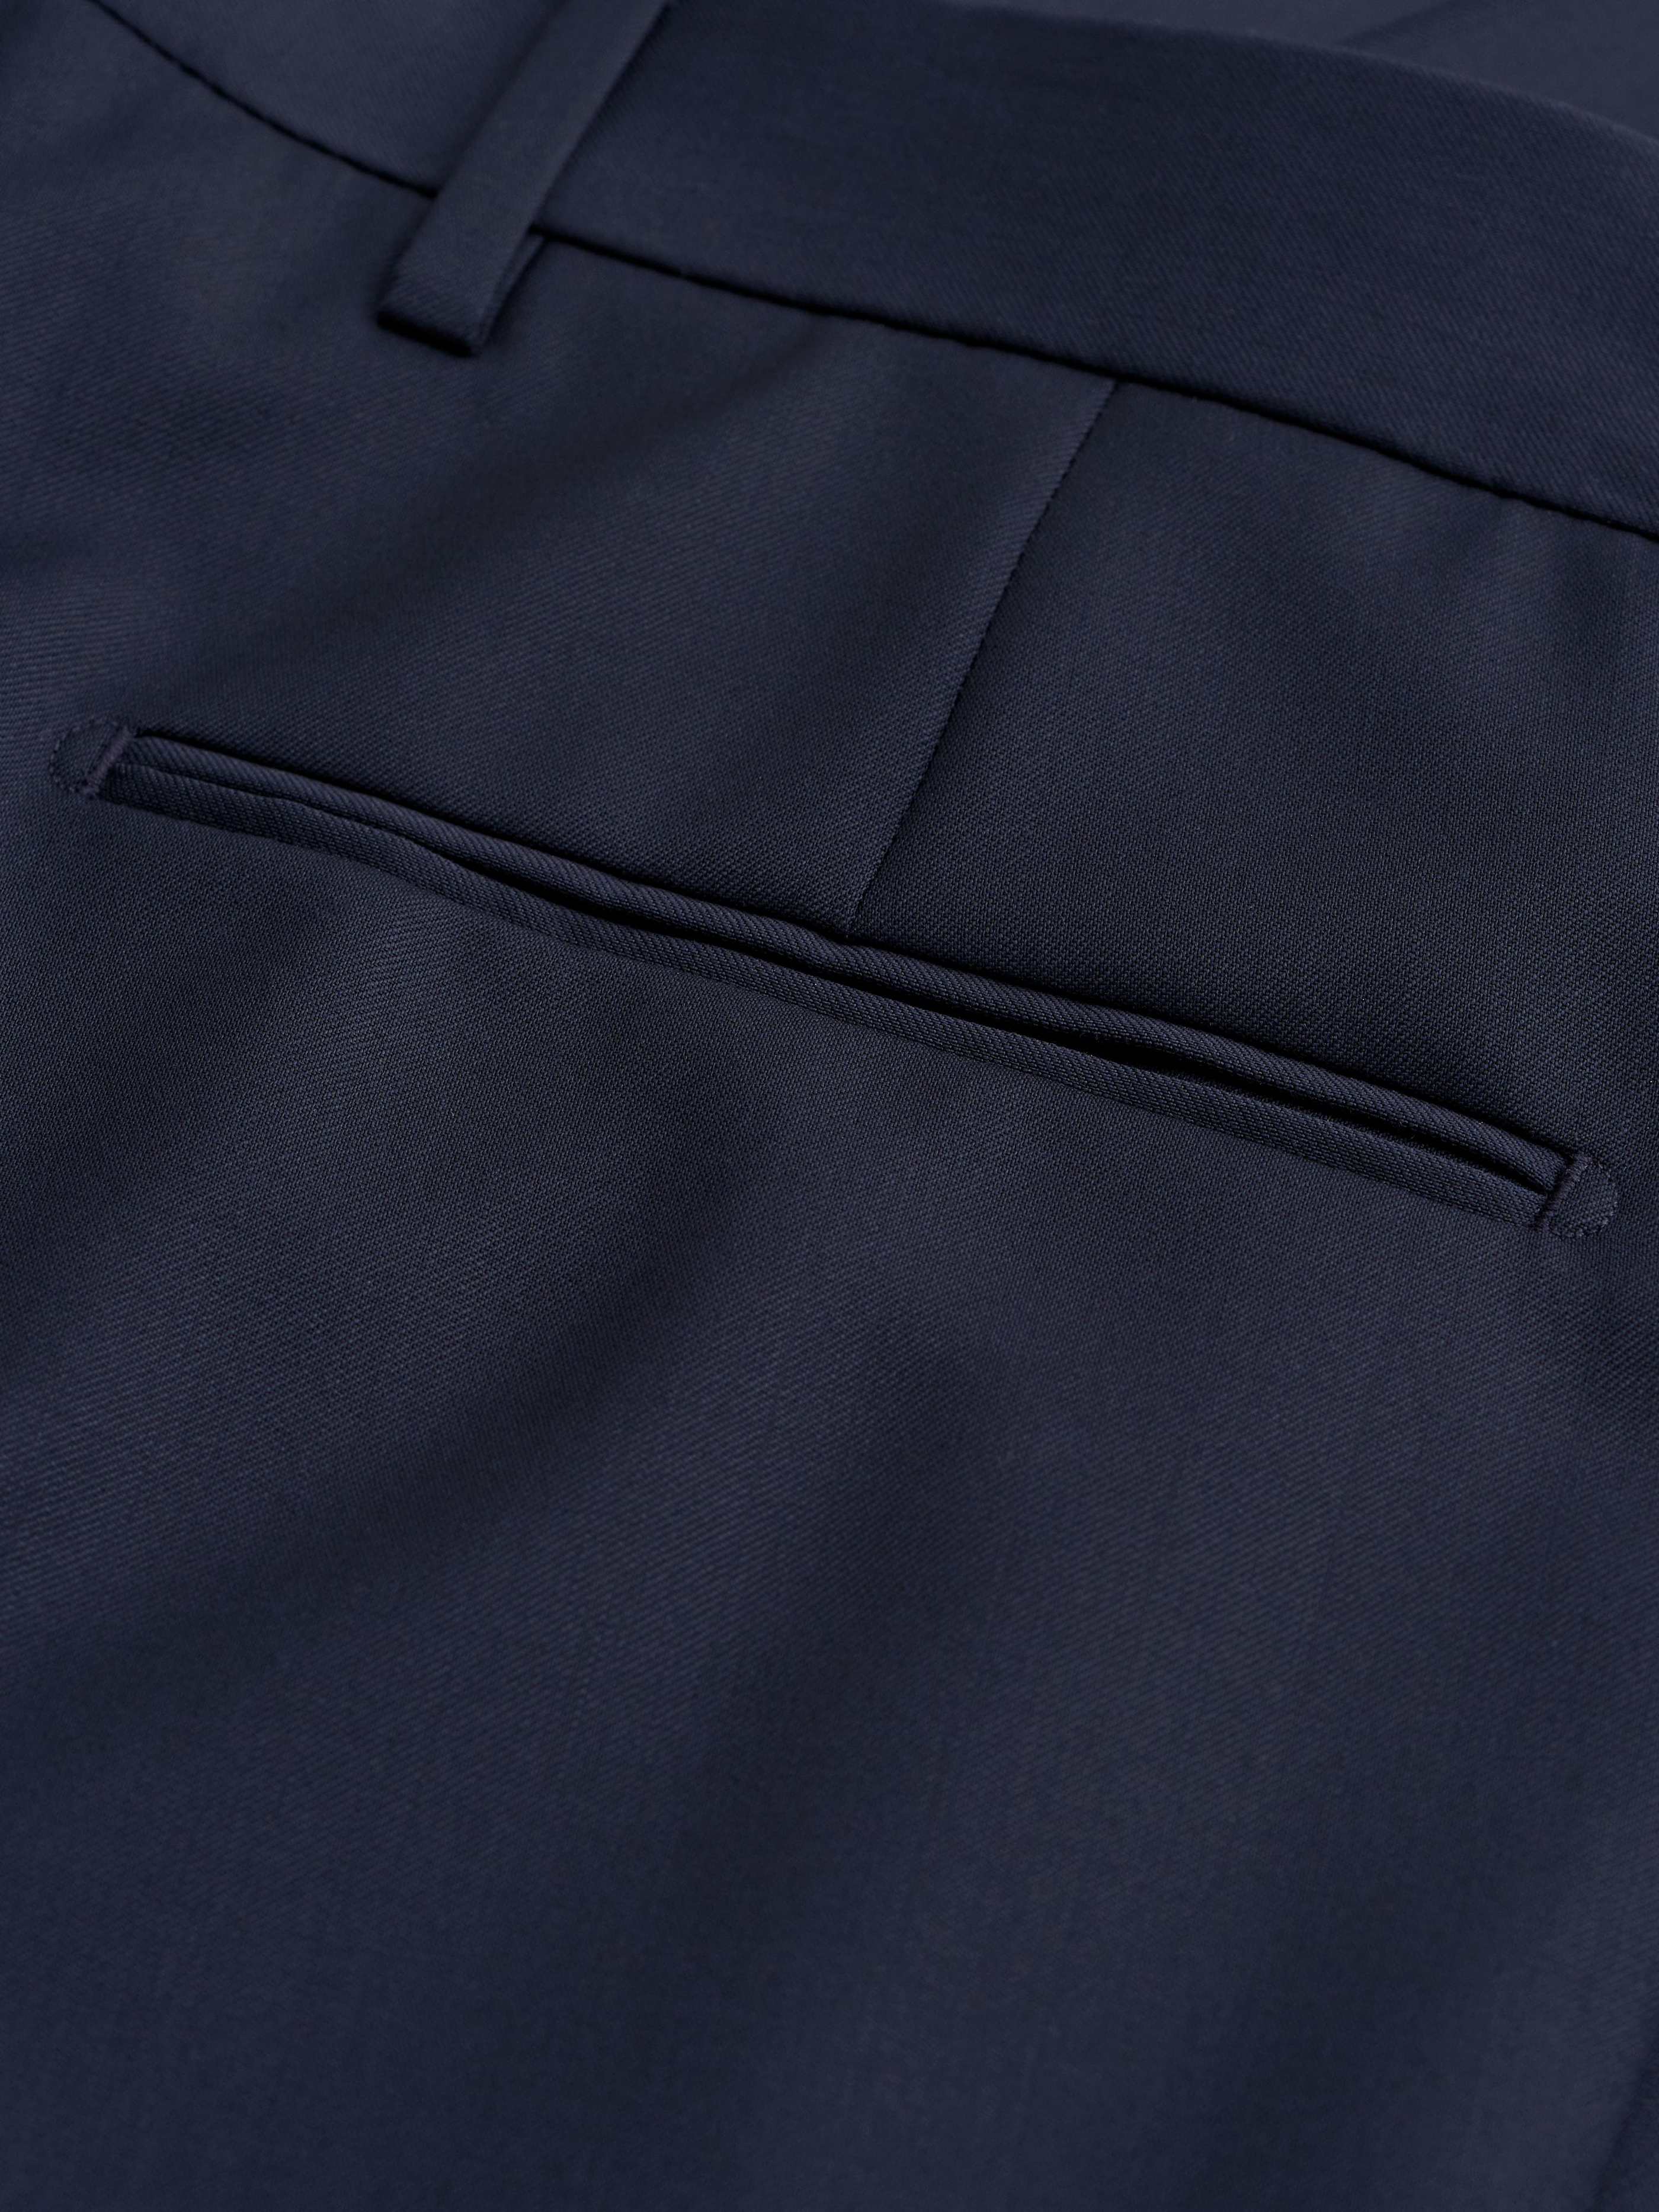 TIGER OF SWEDEN Tenutas Trousers in Navy T70698004Z 52 09C-DARK INK FROM EIGHTYWINGOLD - OFFICIAL BRAND PARTNER